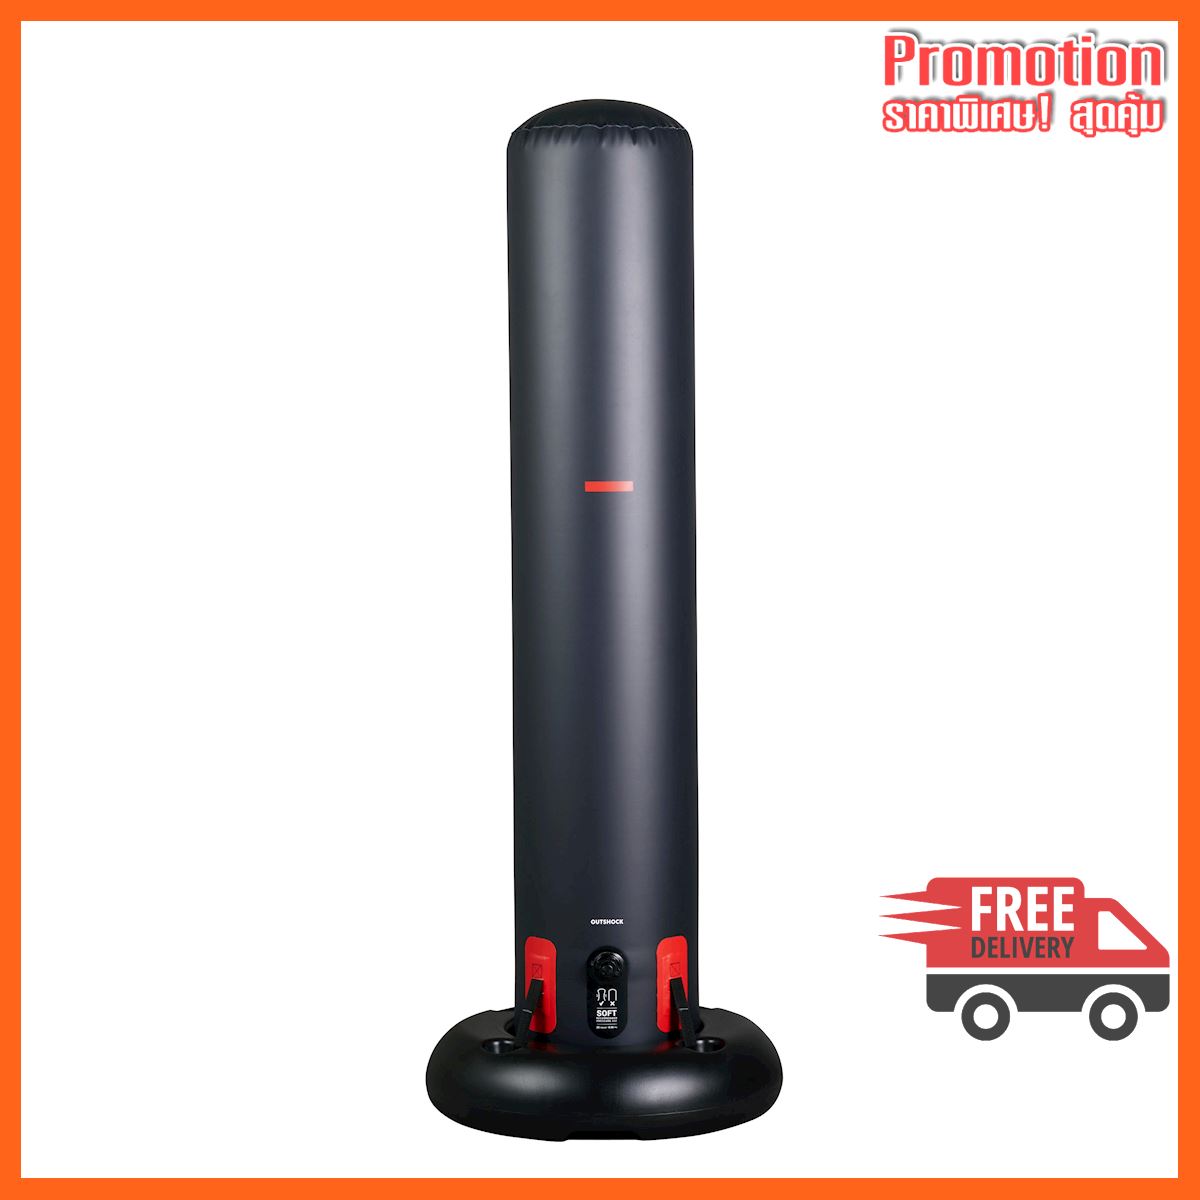 Free-Standing Punching Bag 100 - Inflatable